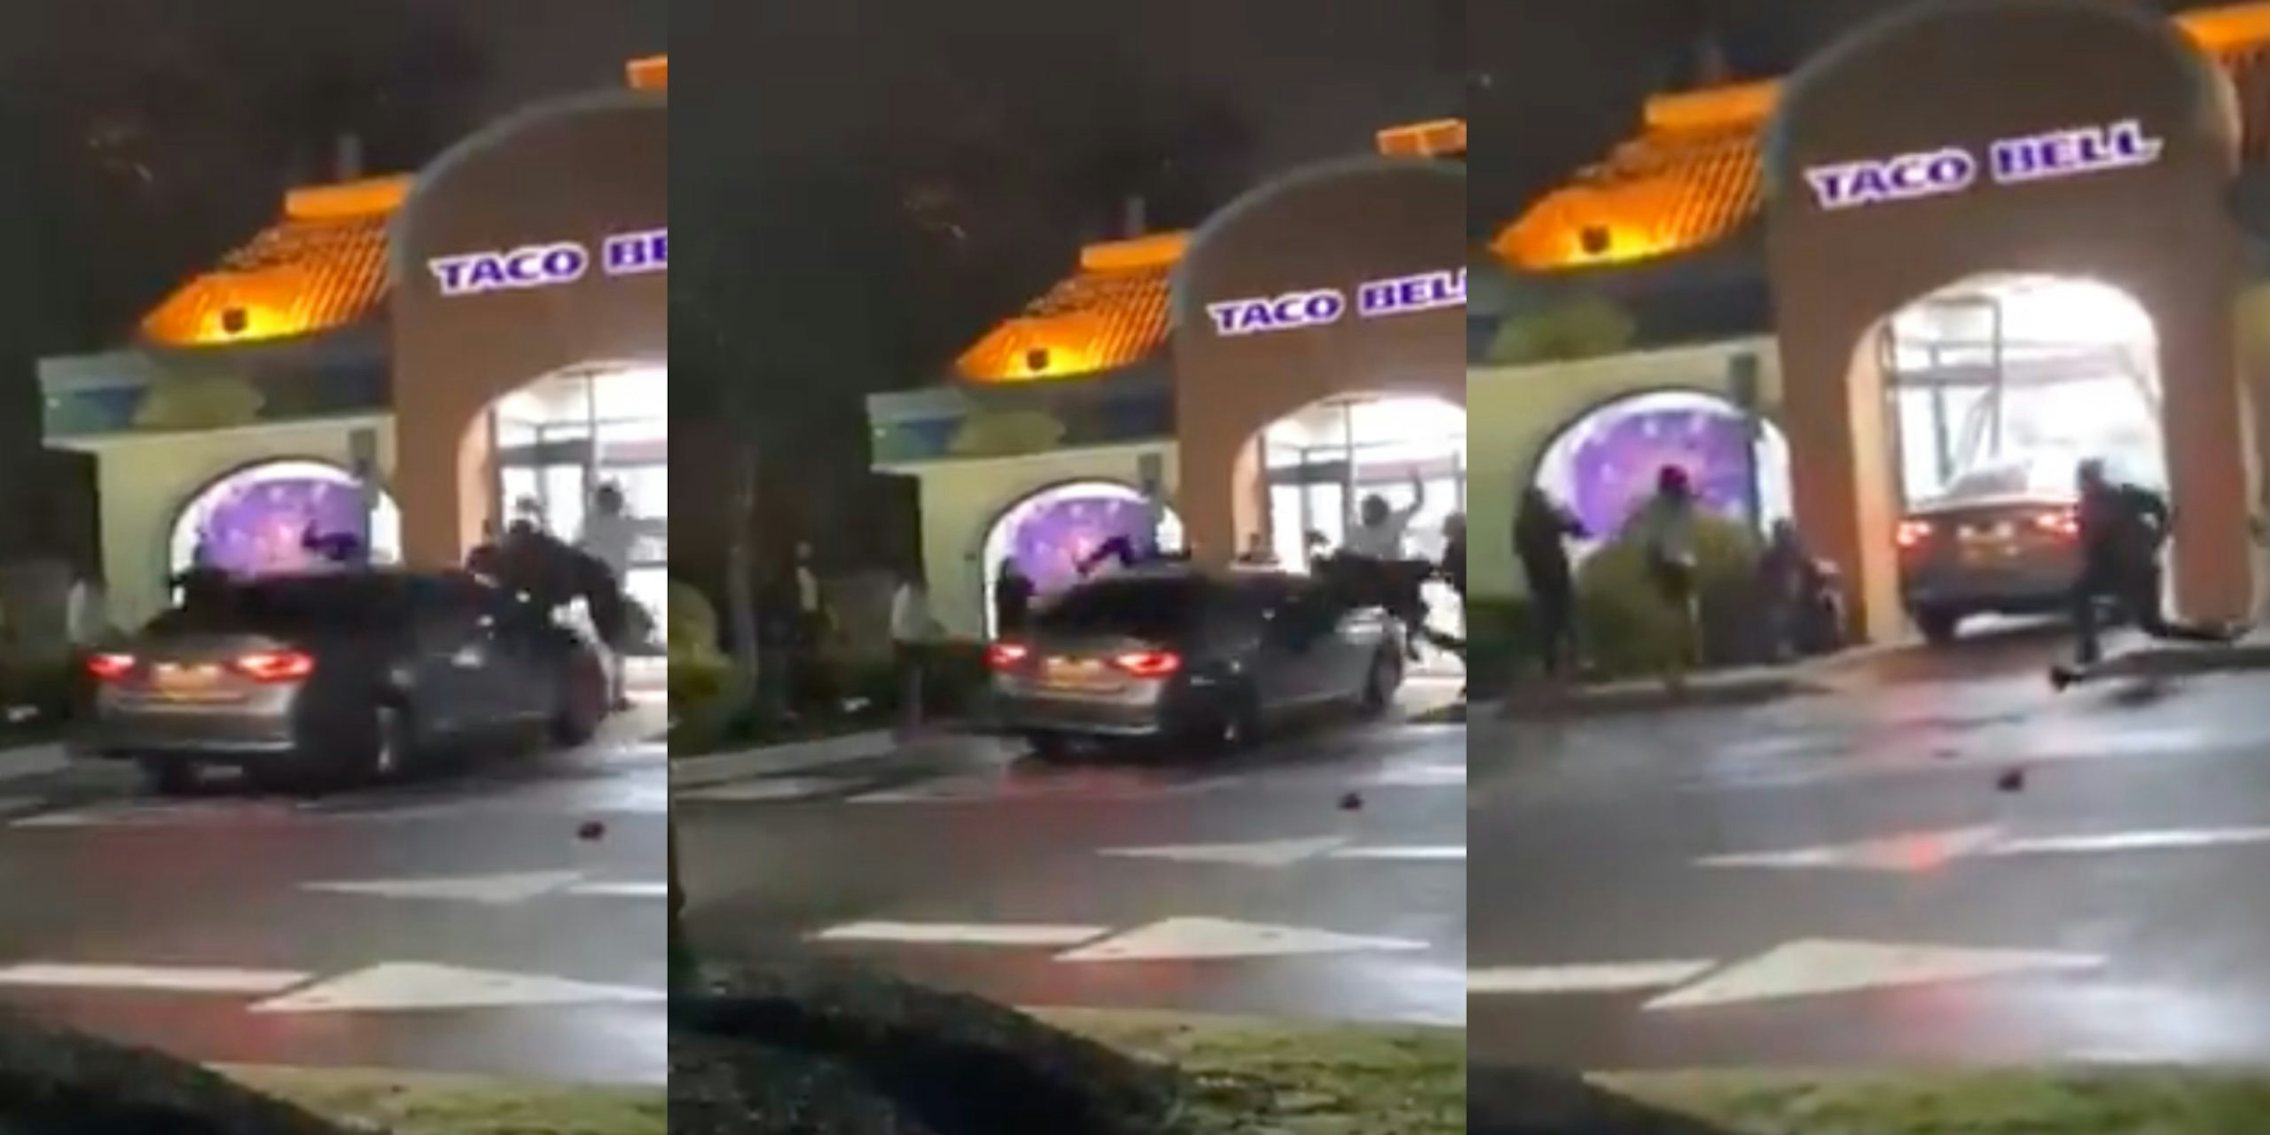 Video shows car ramming into a group of Taco Bell employees